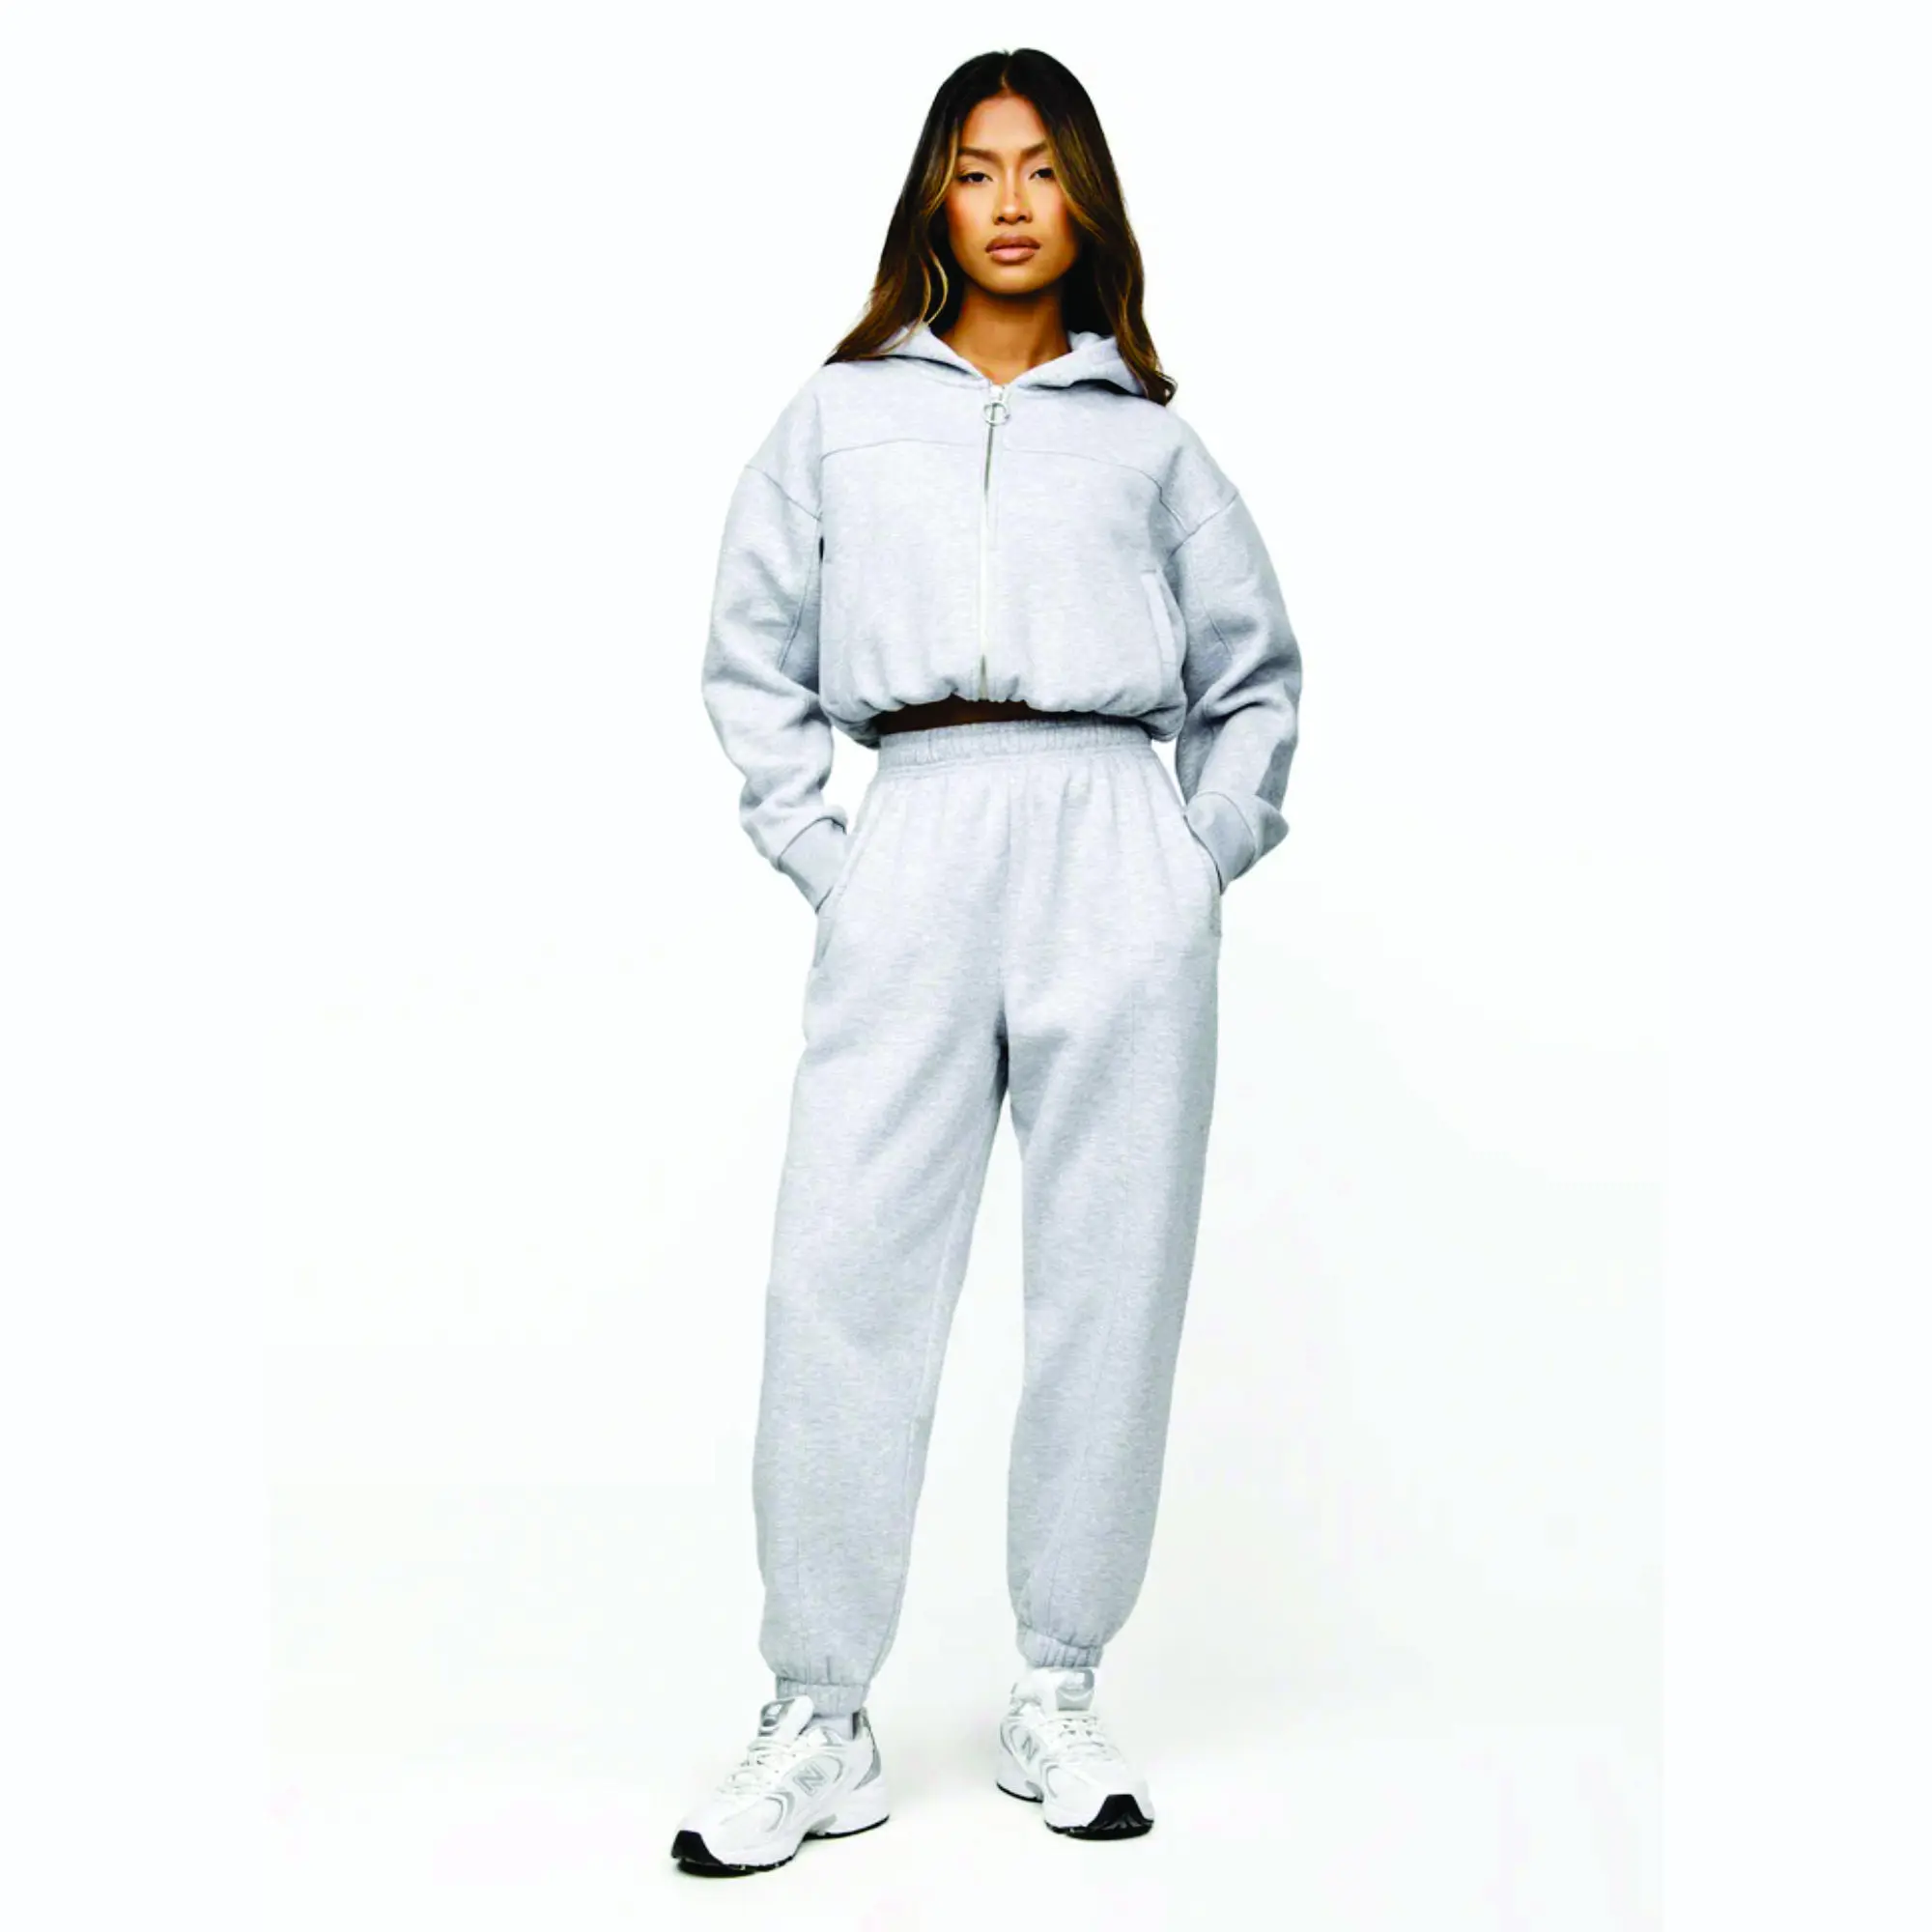 Women's Heather Grey Cropped Hoodie - 65% Cotton  35% Polyester  Full Zip Athletics Club Tracksuit Top